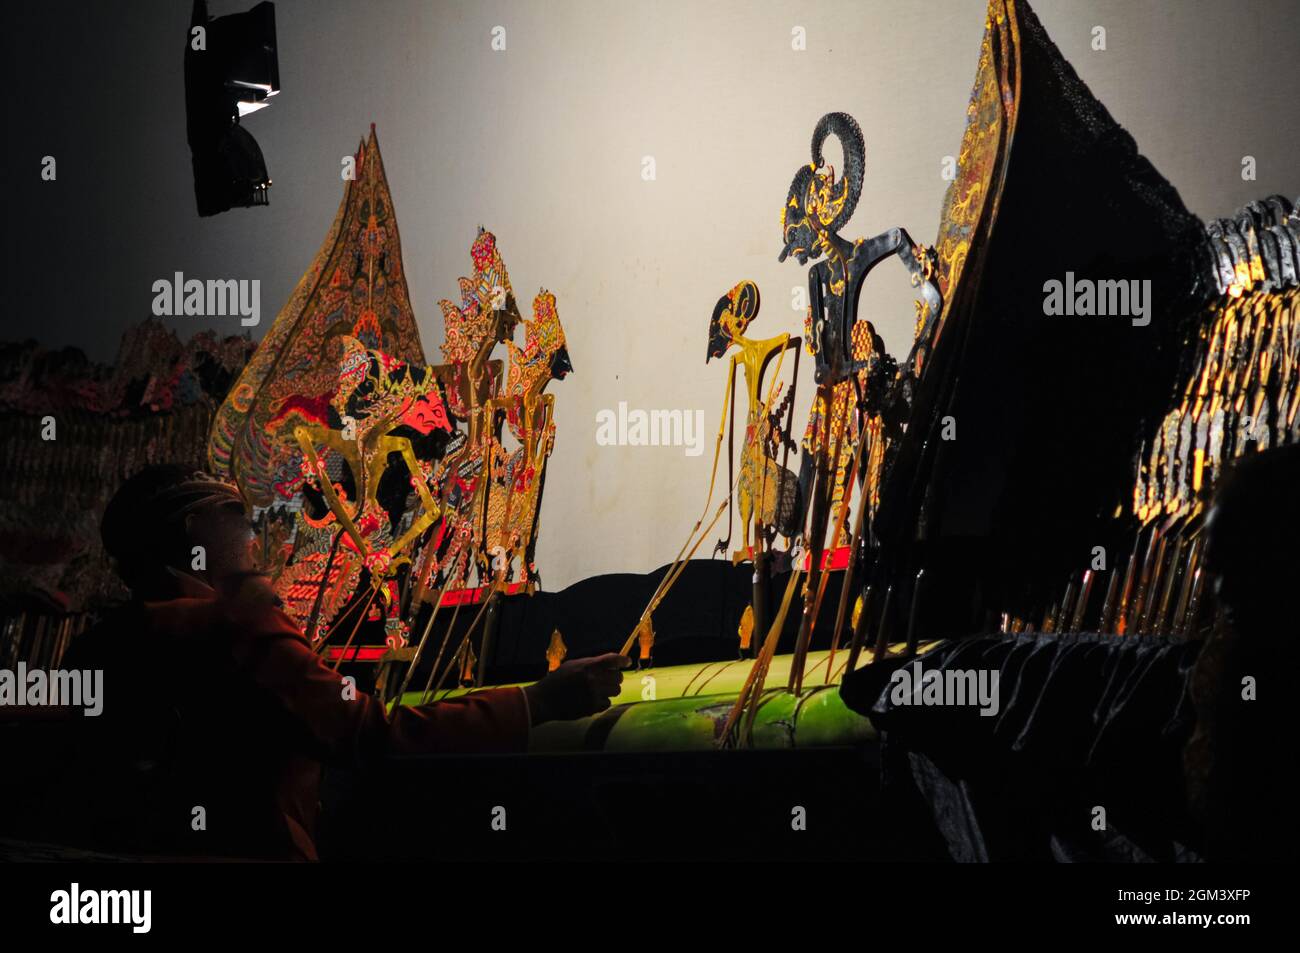 Javanese shadow puppet show or wayang kulit. Shadow puppets are usually staged from night to early morning and are free to watch by the public. Stock Photo